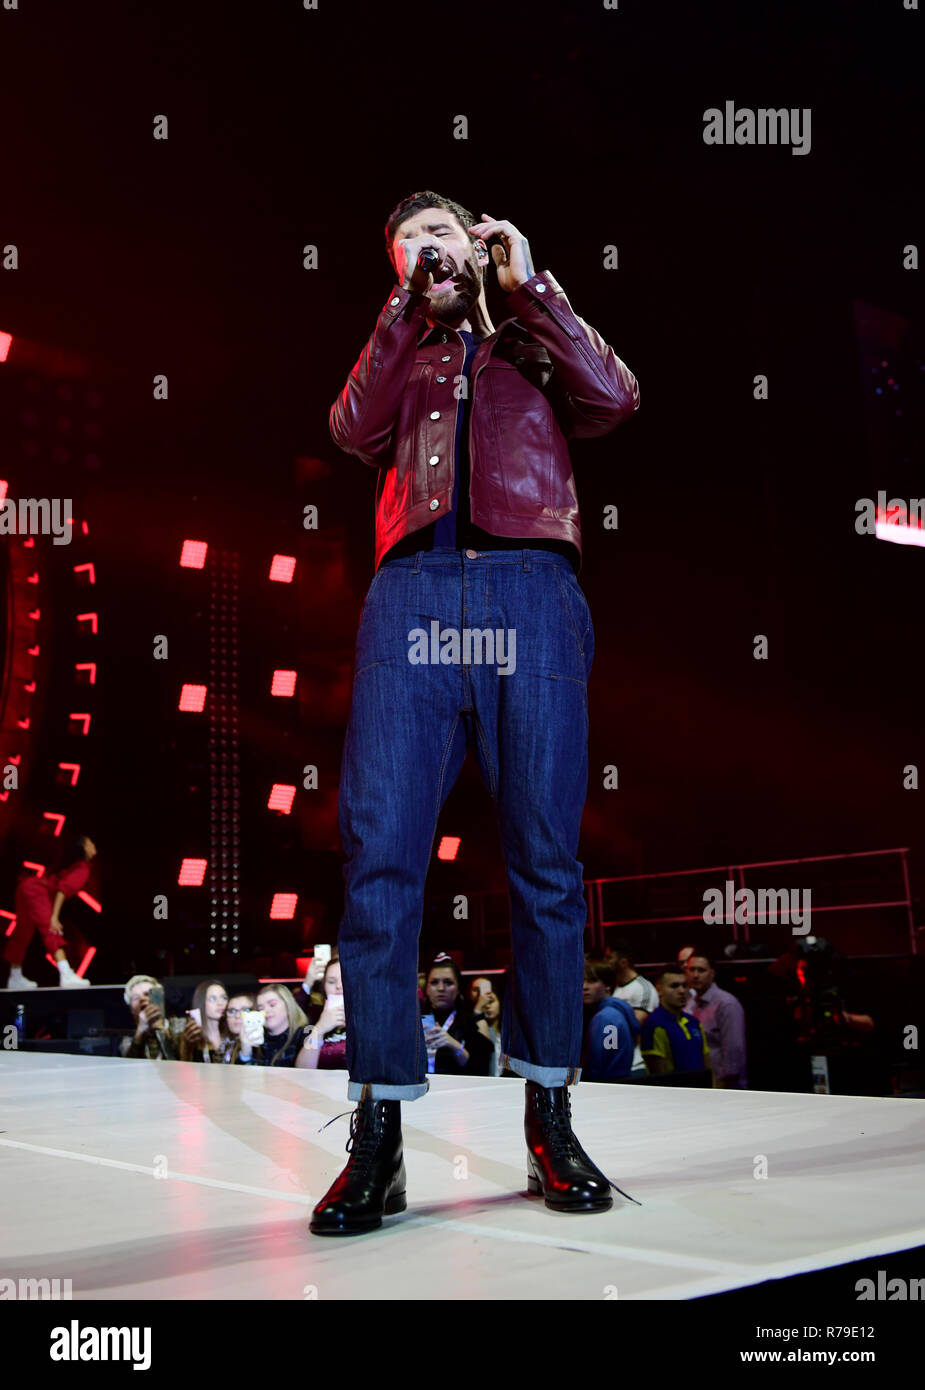 Liam Payne on stage during day one of Capital's Jingle Bell Ball with Coca-Cola at London's O2 Arena. PRESS ASSOCIATION Photo. Night one of the event saw performances from Liam Payne, Rita Ora, Ellie Goulding and David Guetta. Picture date: Saturday December 8, 2018. See PA story SHOWBIZ Jingle Bell. Photo credit should read: Ian West/PA Wire on stage during day one of Capital's Jingle Bell Ball with Coca-Cola at London's O2 Arena. PRESS ASSOCIATION Photo. Night one of the event saw performances from Liam Payne, Rita Ora, Ellie Goulding and David Guetta. Picture date: Saturday December 8, 2018 Stock Photo